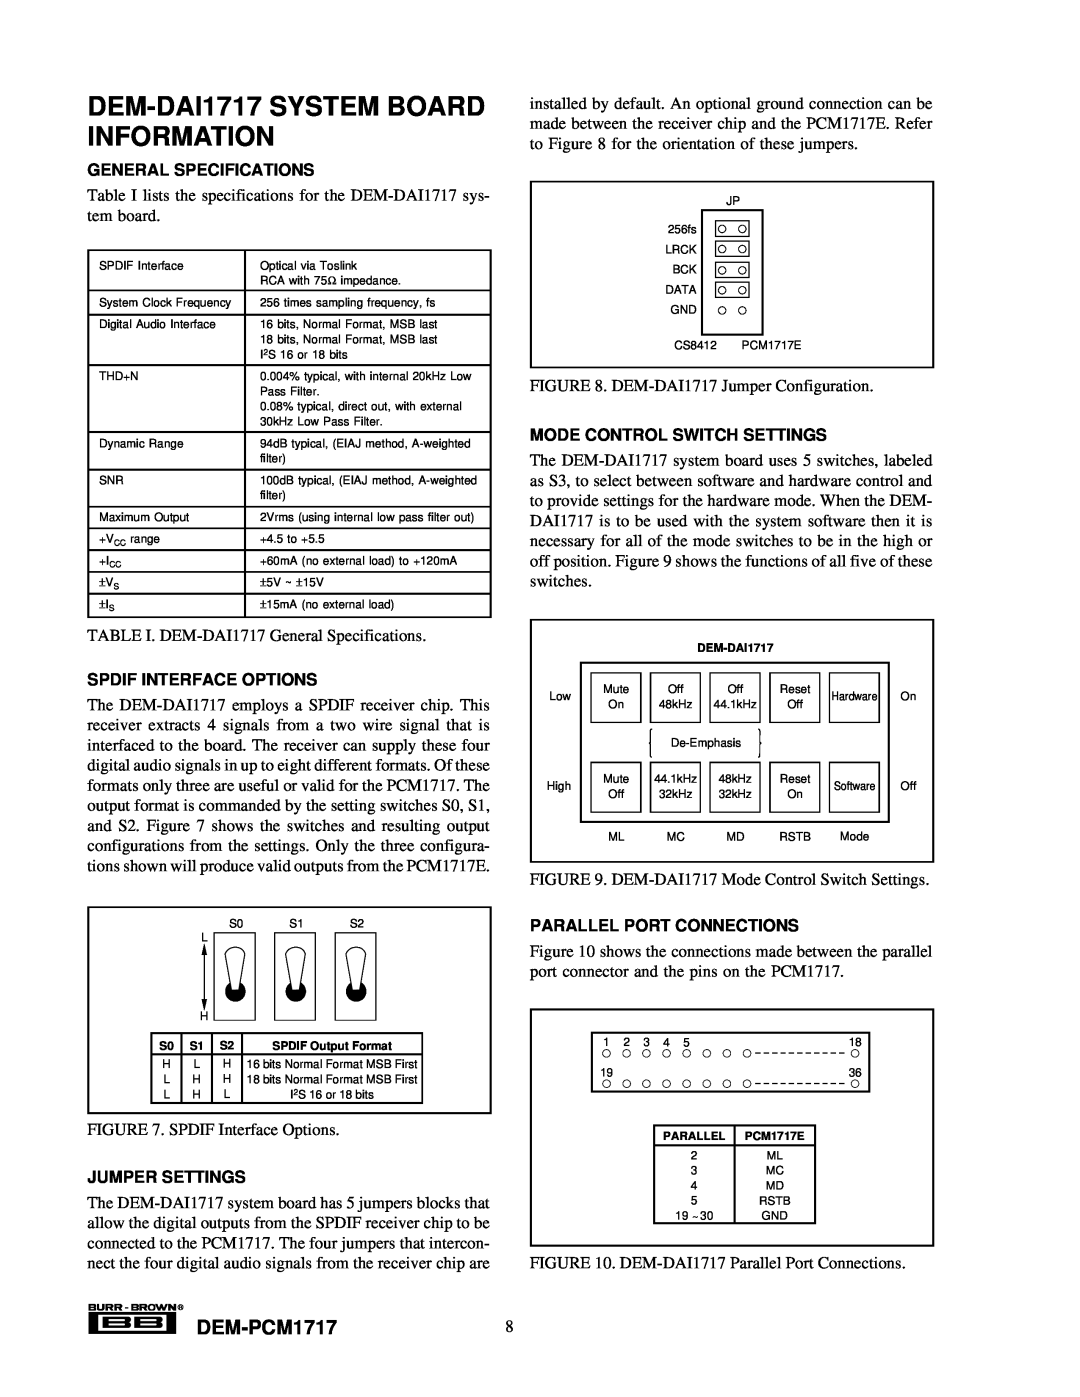 Texas Instruments DEM-DAI1717SYSTEM BOARD INFORMATION, DEM-PCM17178, General Specifications, Spdif Interface Options 